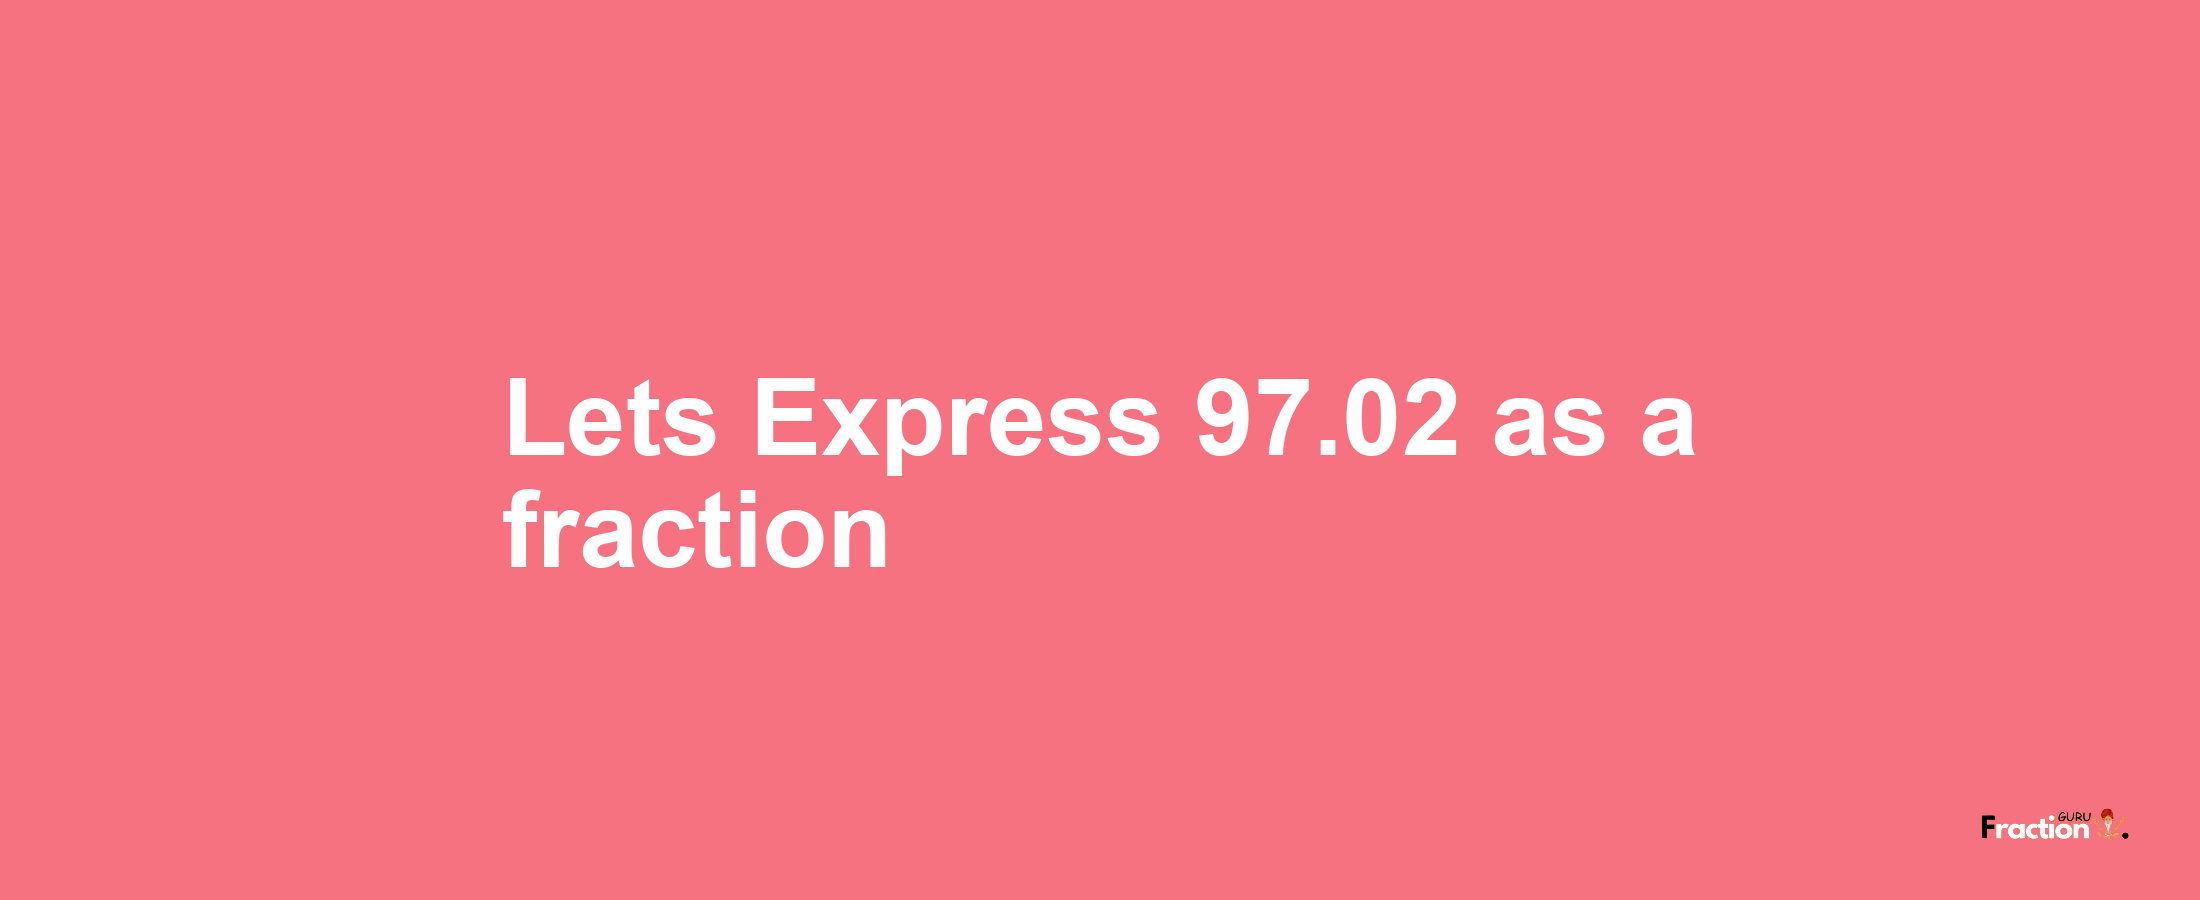 Lets Express 97.02 as afraction